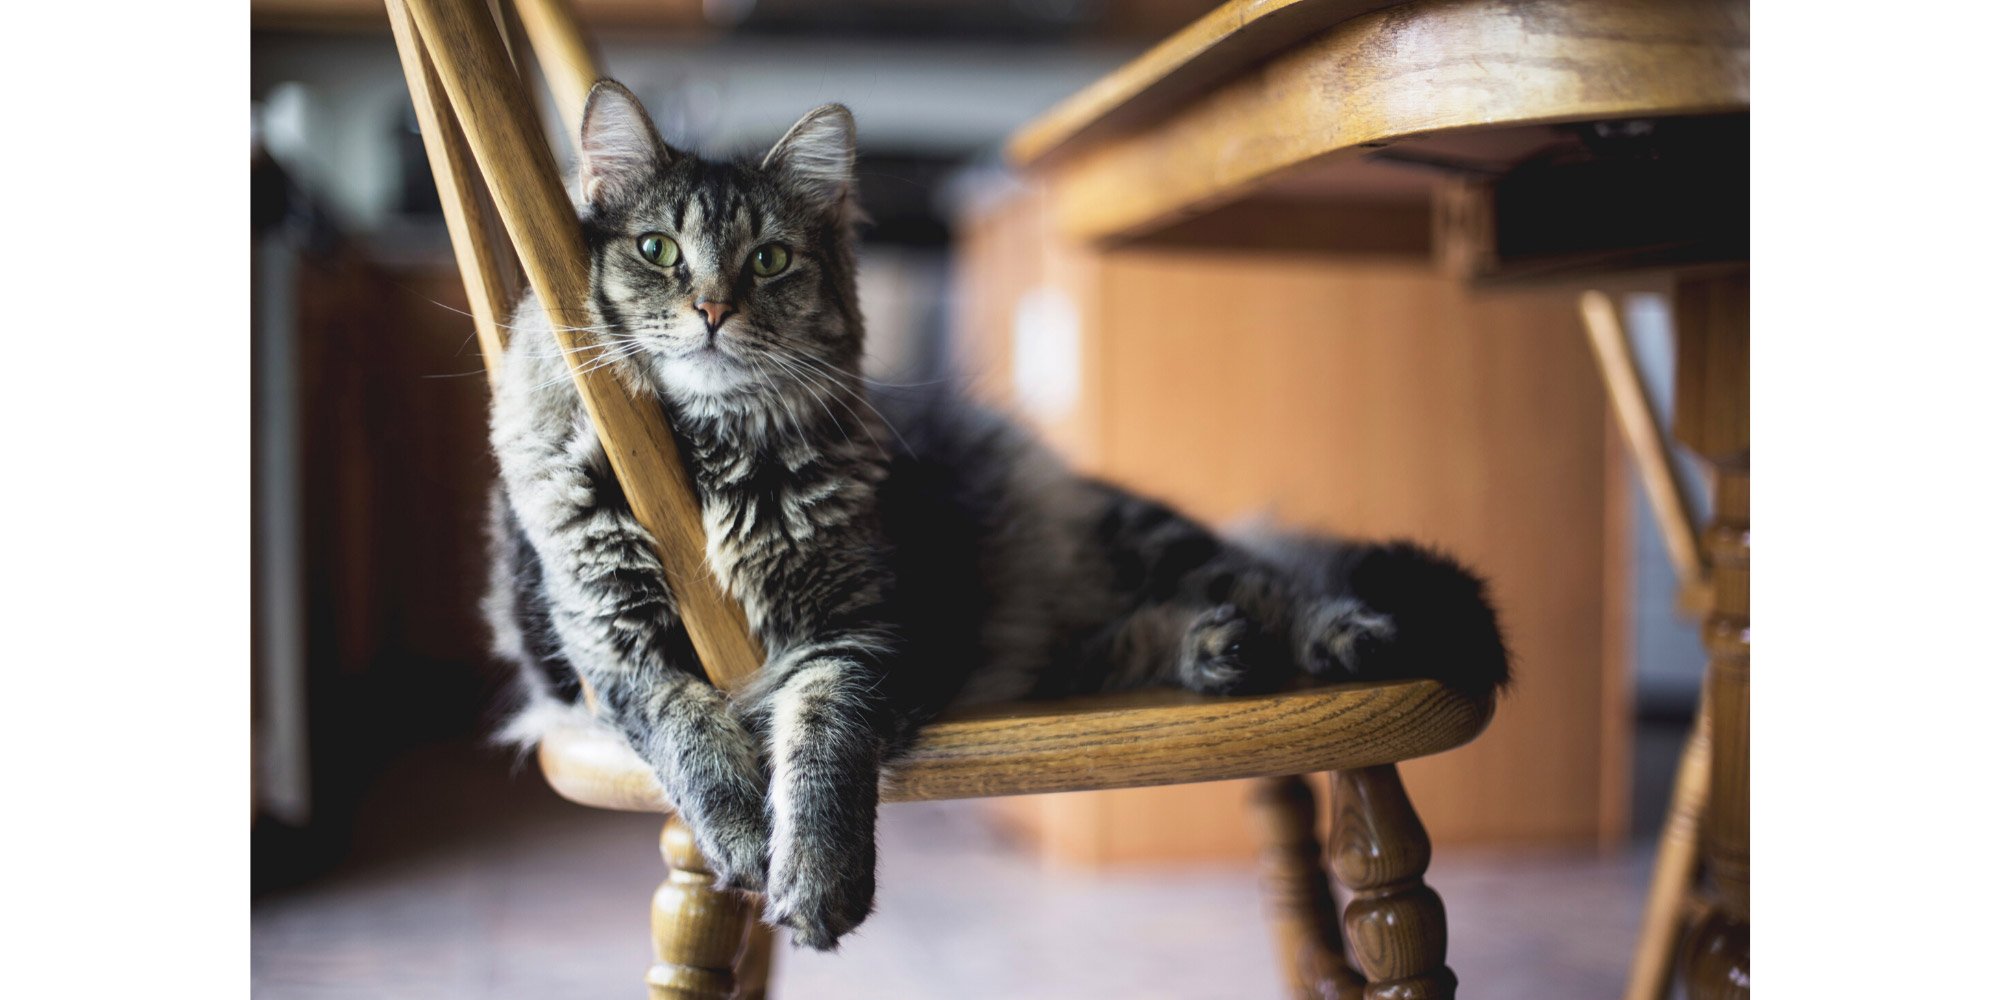 cat lounging in a wood chair